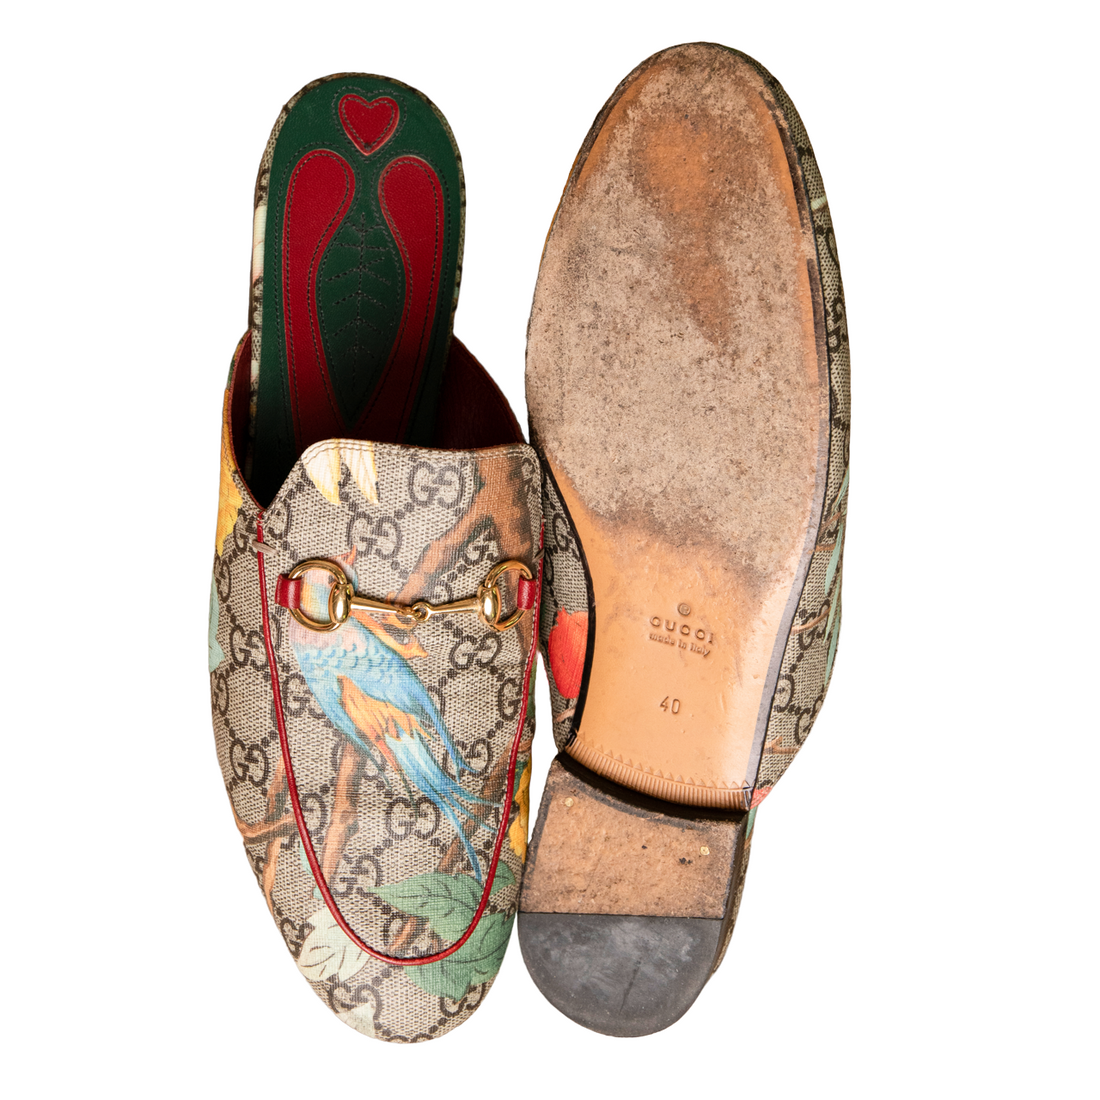 Gucci Princetown slippers with a floral signature print